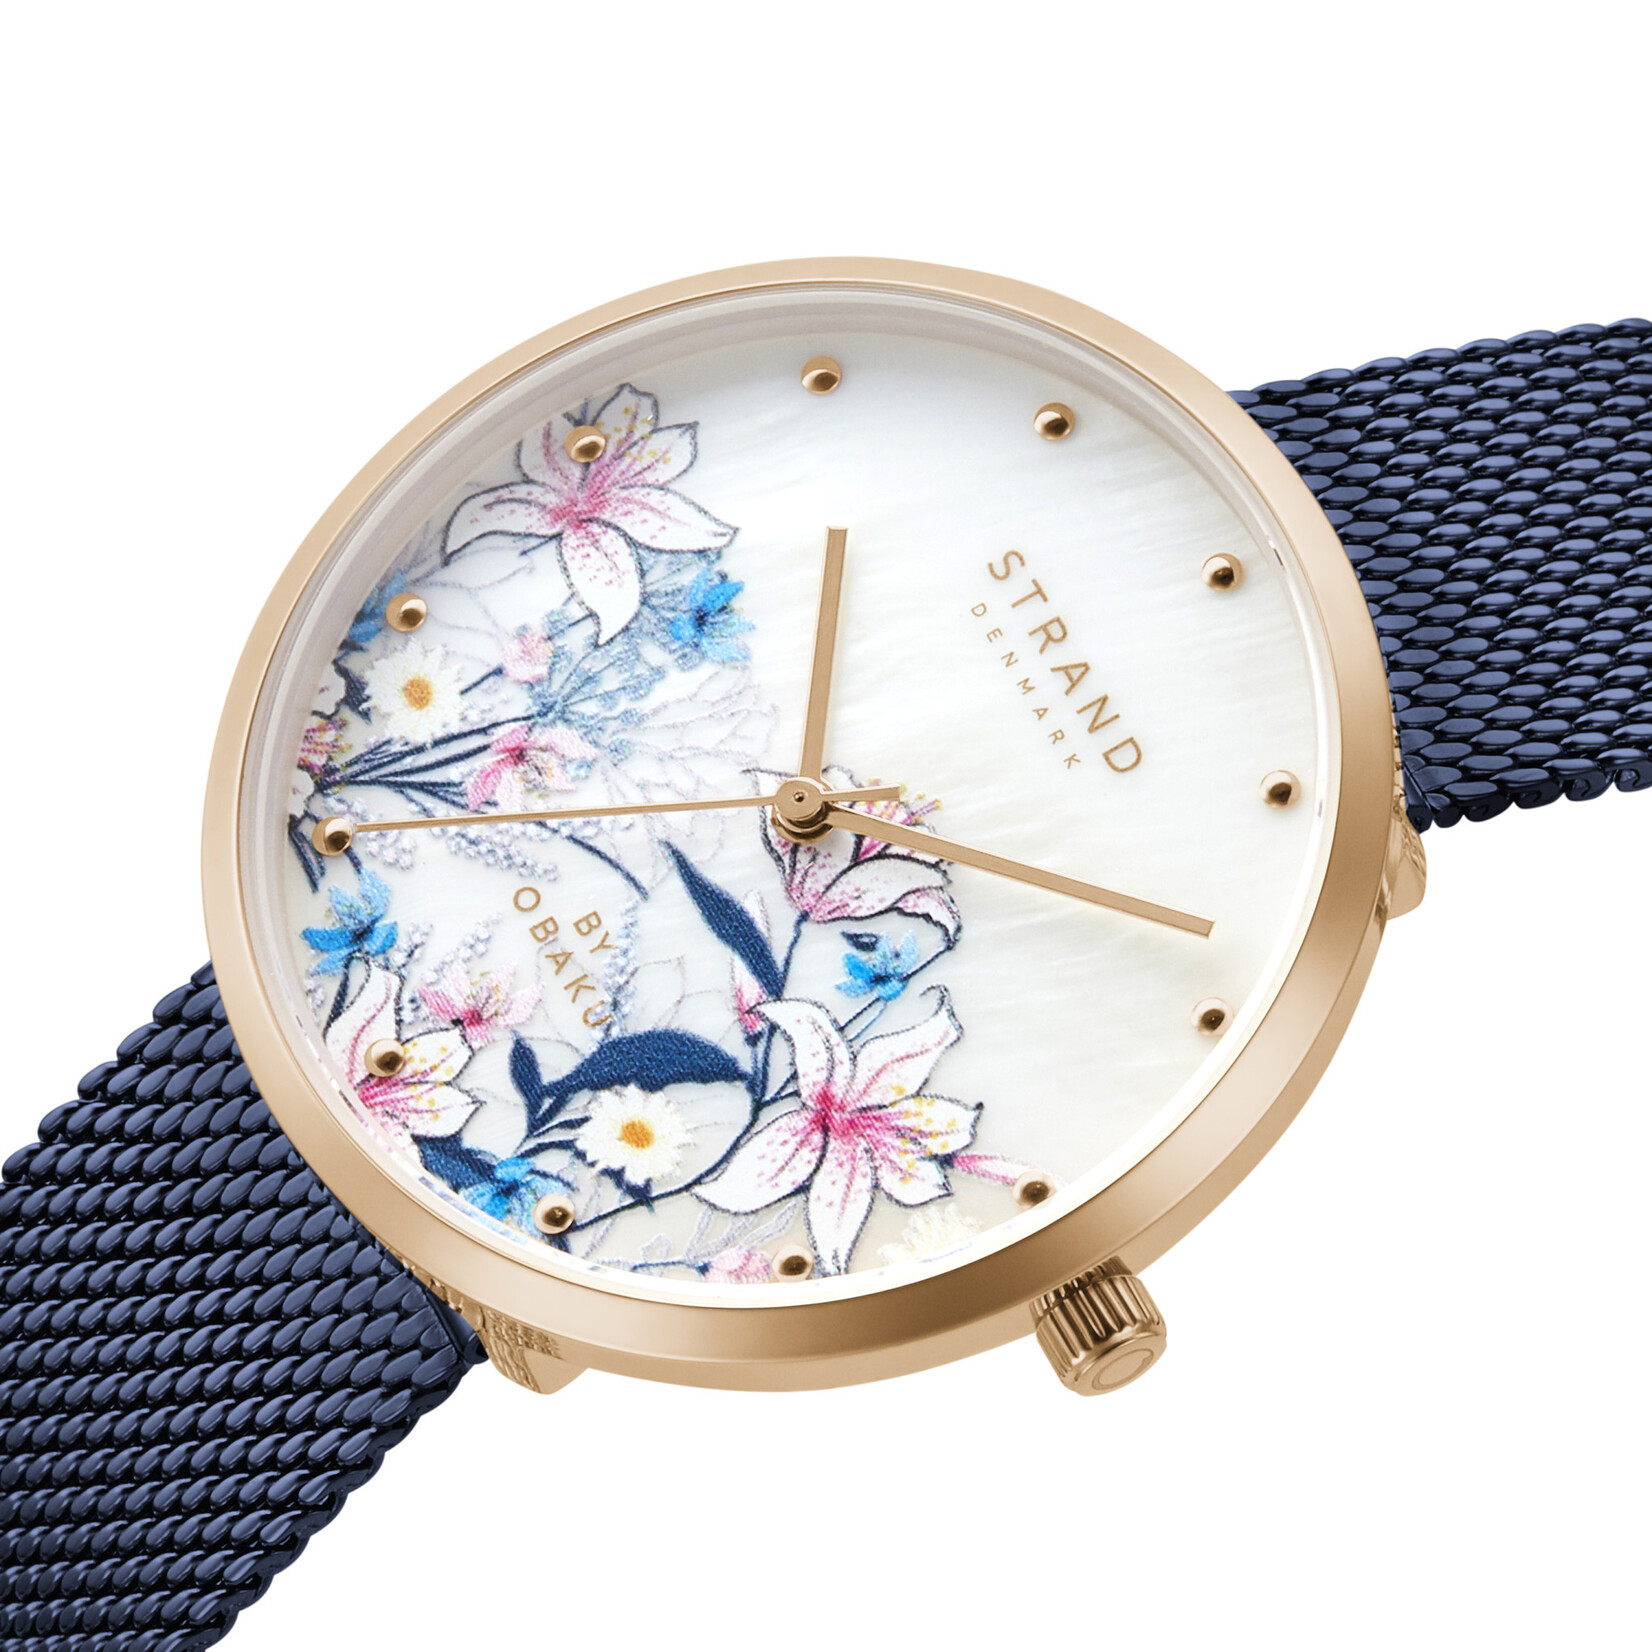 STRAND STRAND Pinktone case Flowers Dial/ Blue mesh band Watch